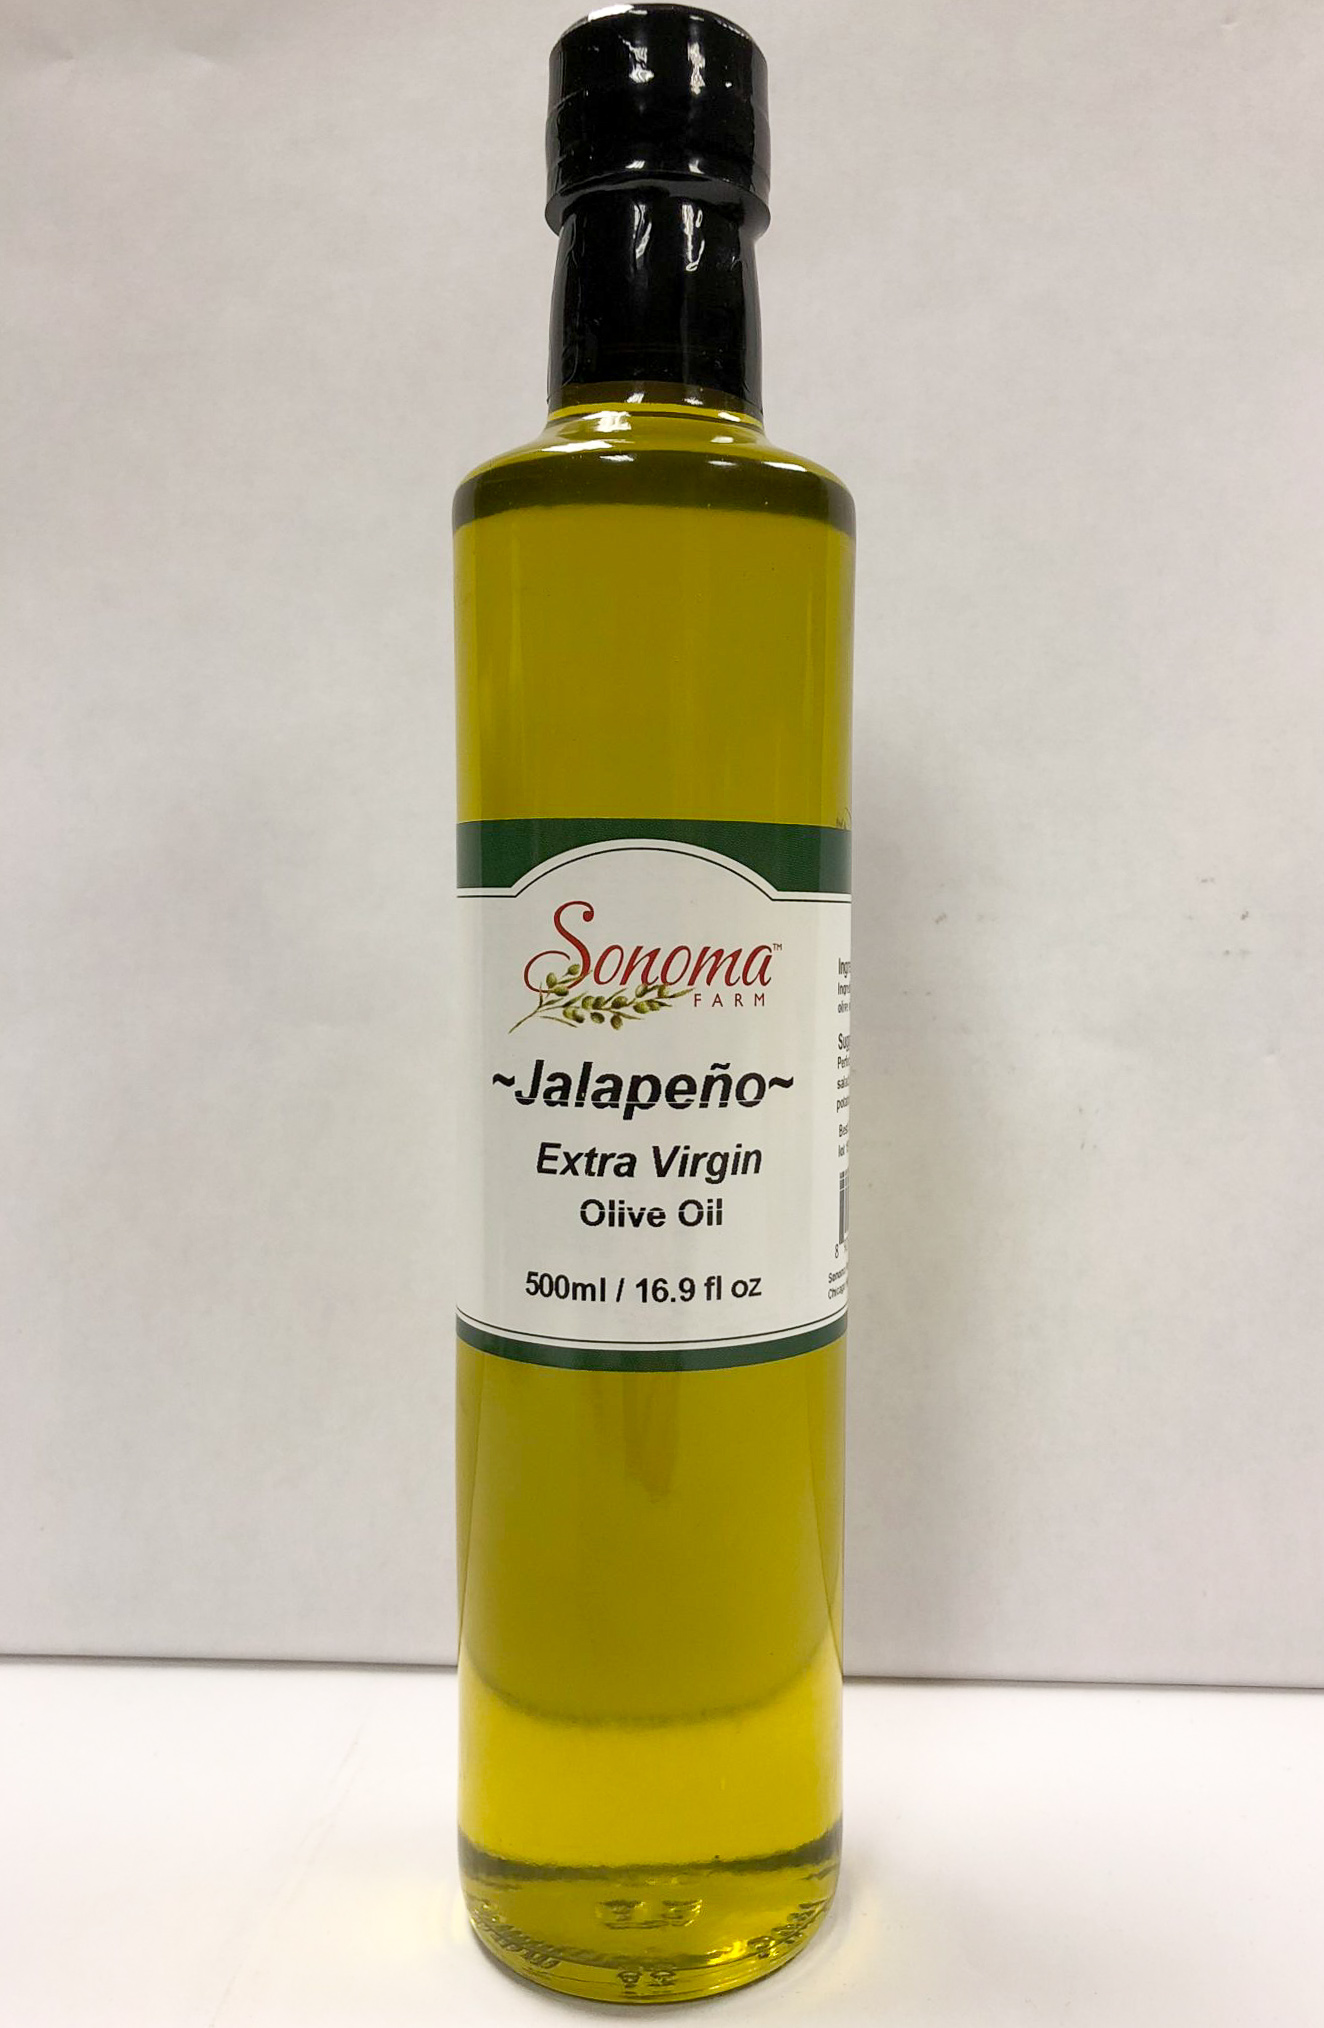 https://www.sonomafarm.com/product/jalapeno-infused-extra-virgin-olive-oil-variable/